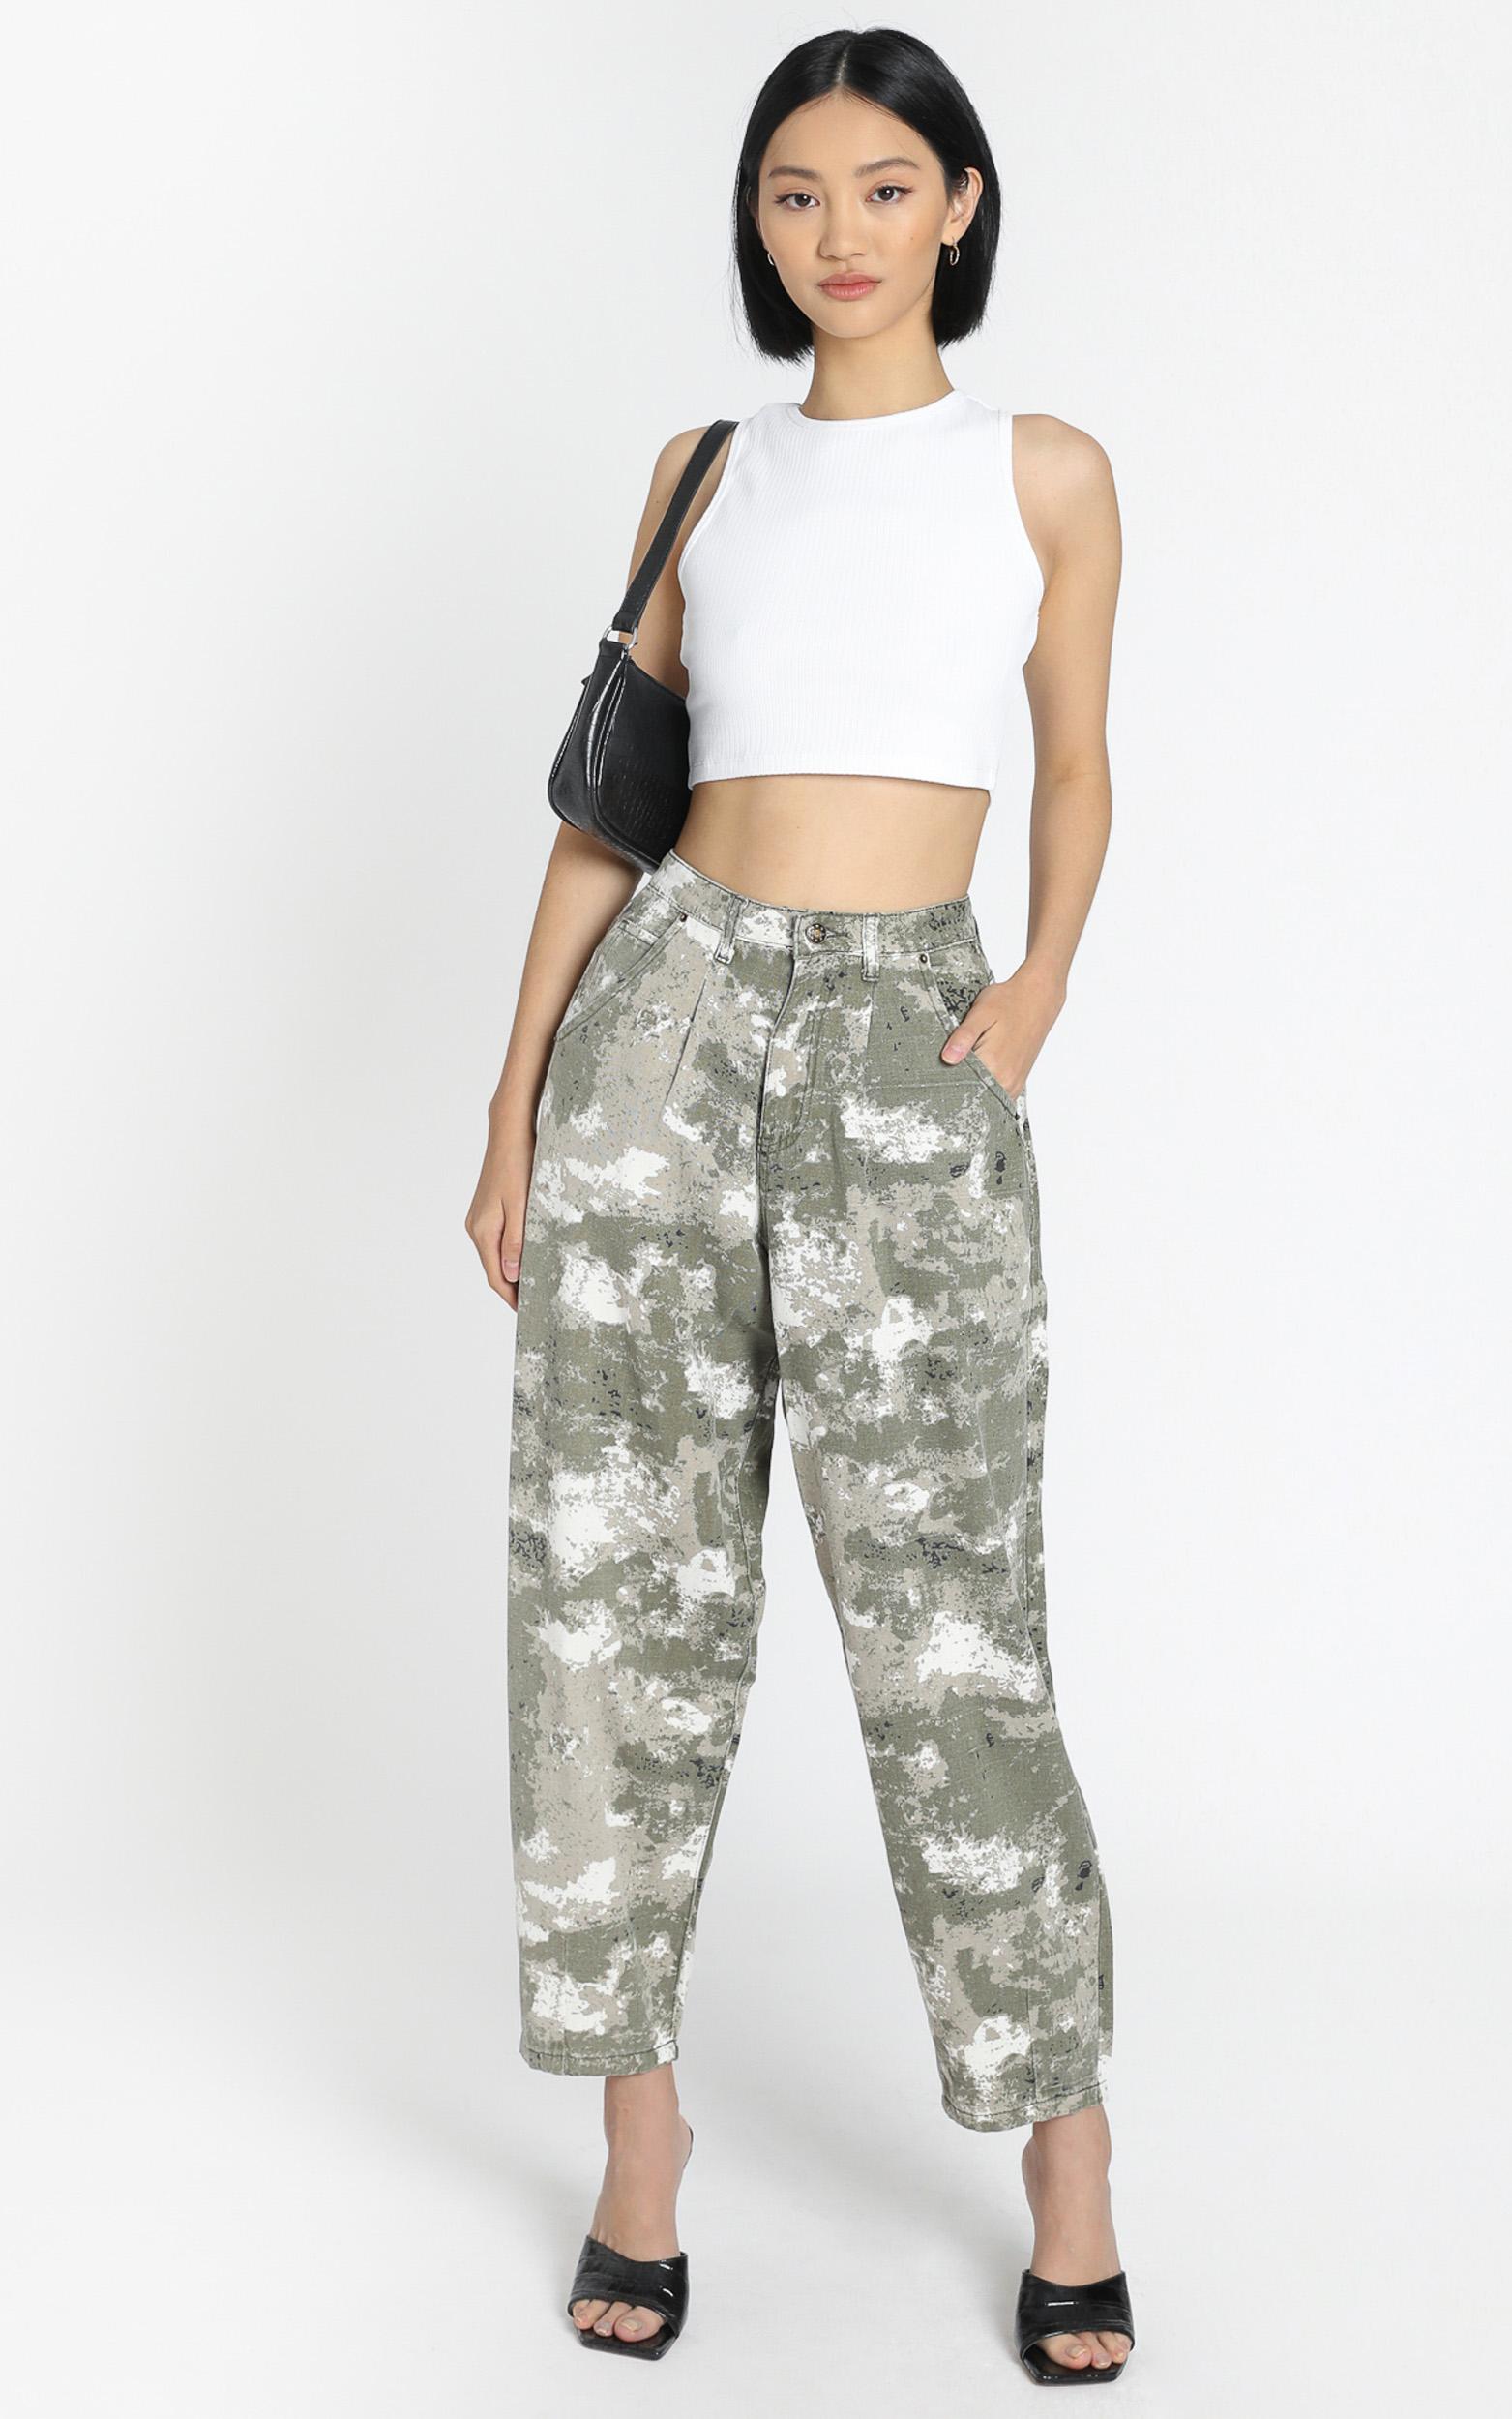 Lioness - On My Way Denim Jeans in Green Camo - 6 (XS), Green, hi-res image number null